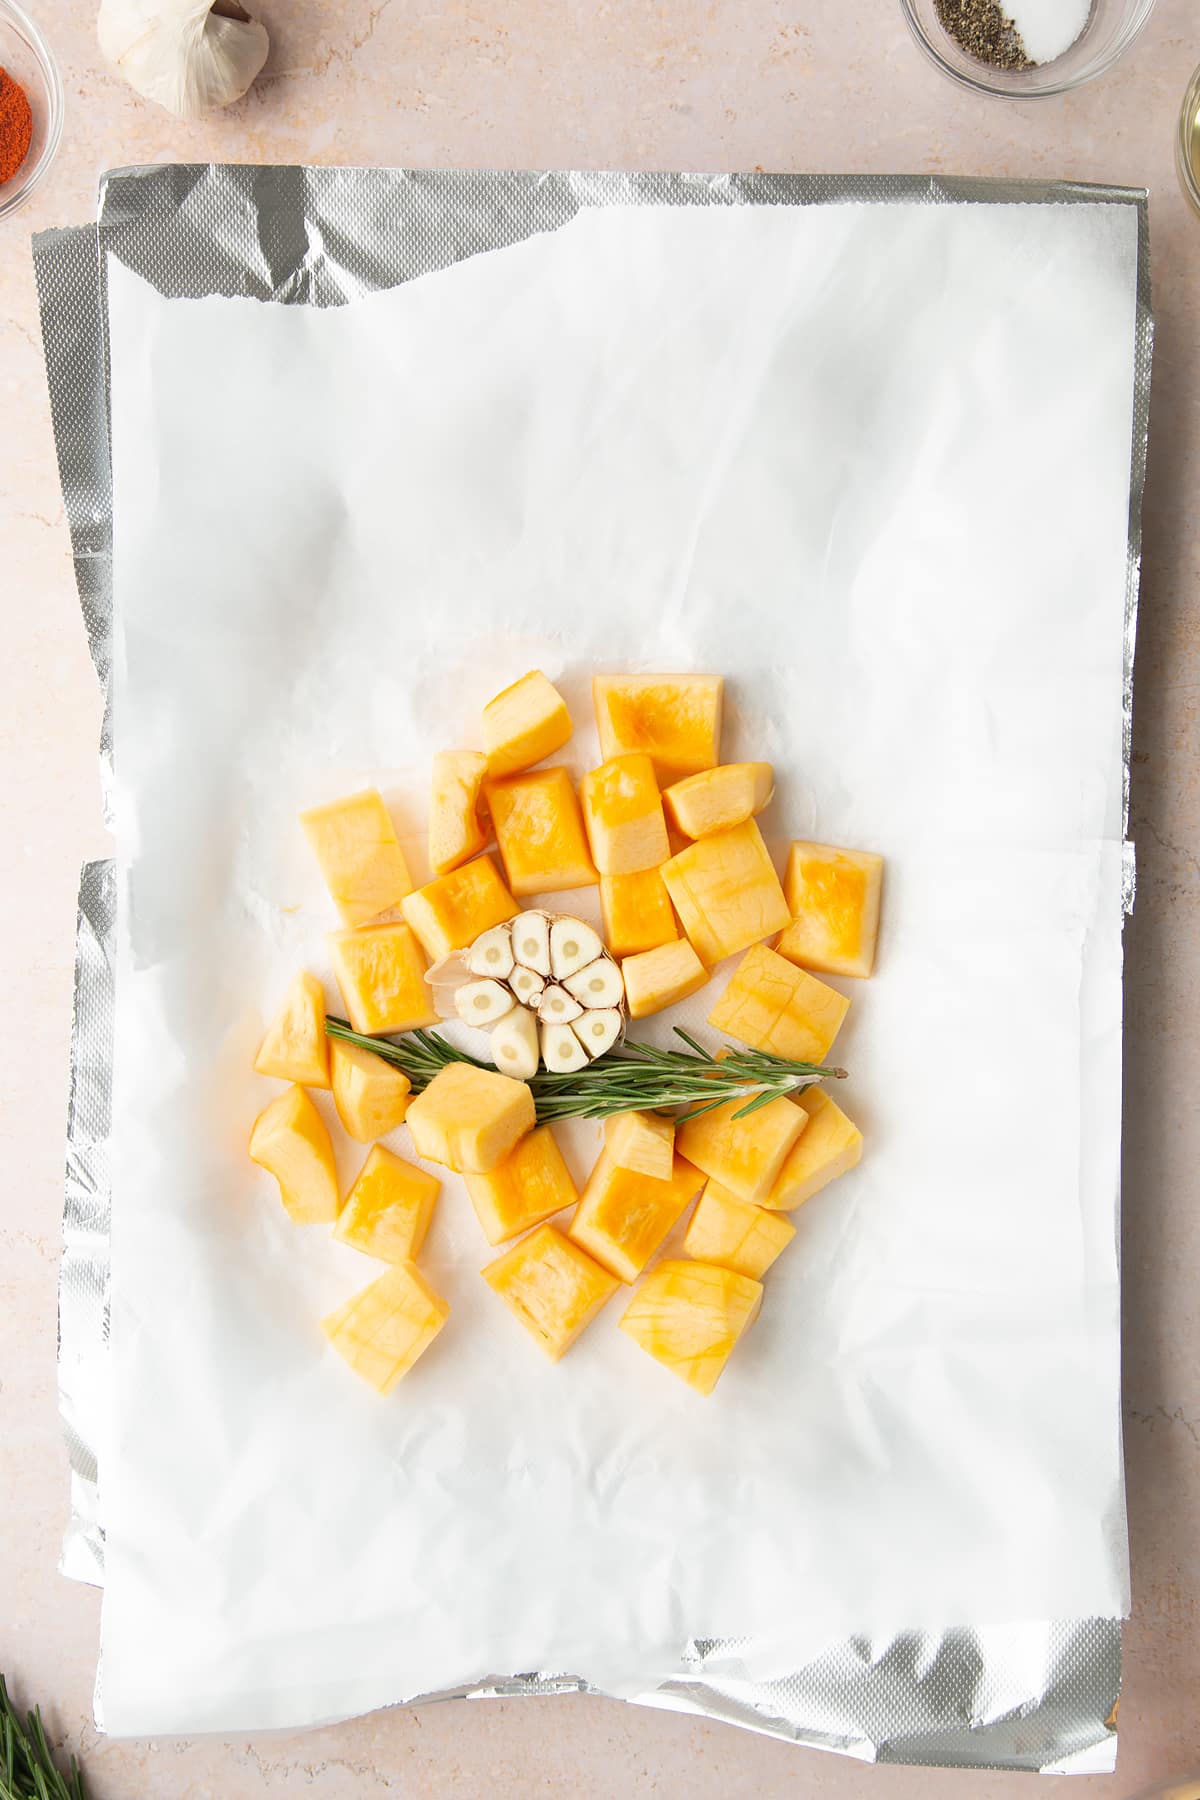 Chopped pumpkin, garlic and rosemary on layers of paper and foil packet on a baking tray. 